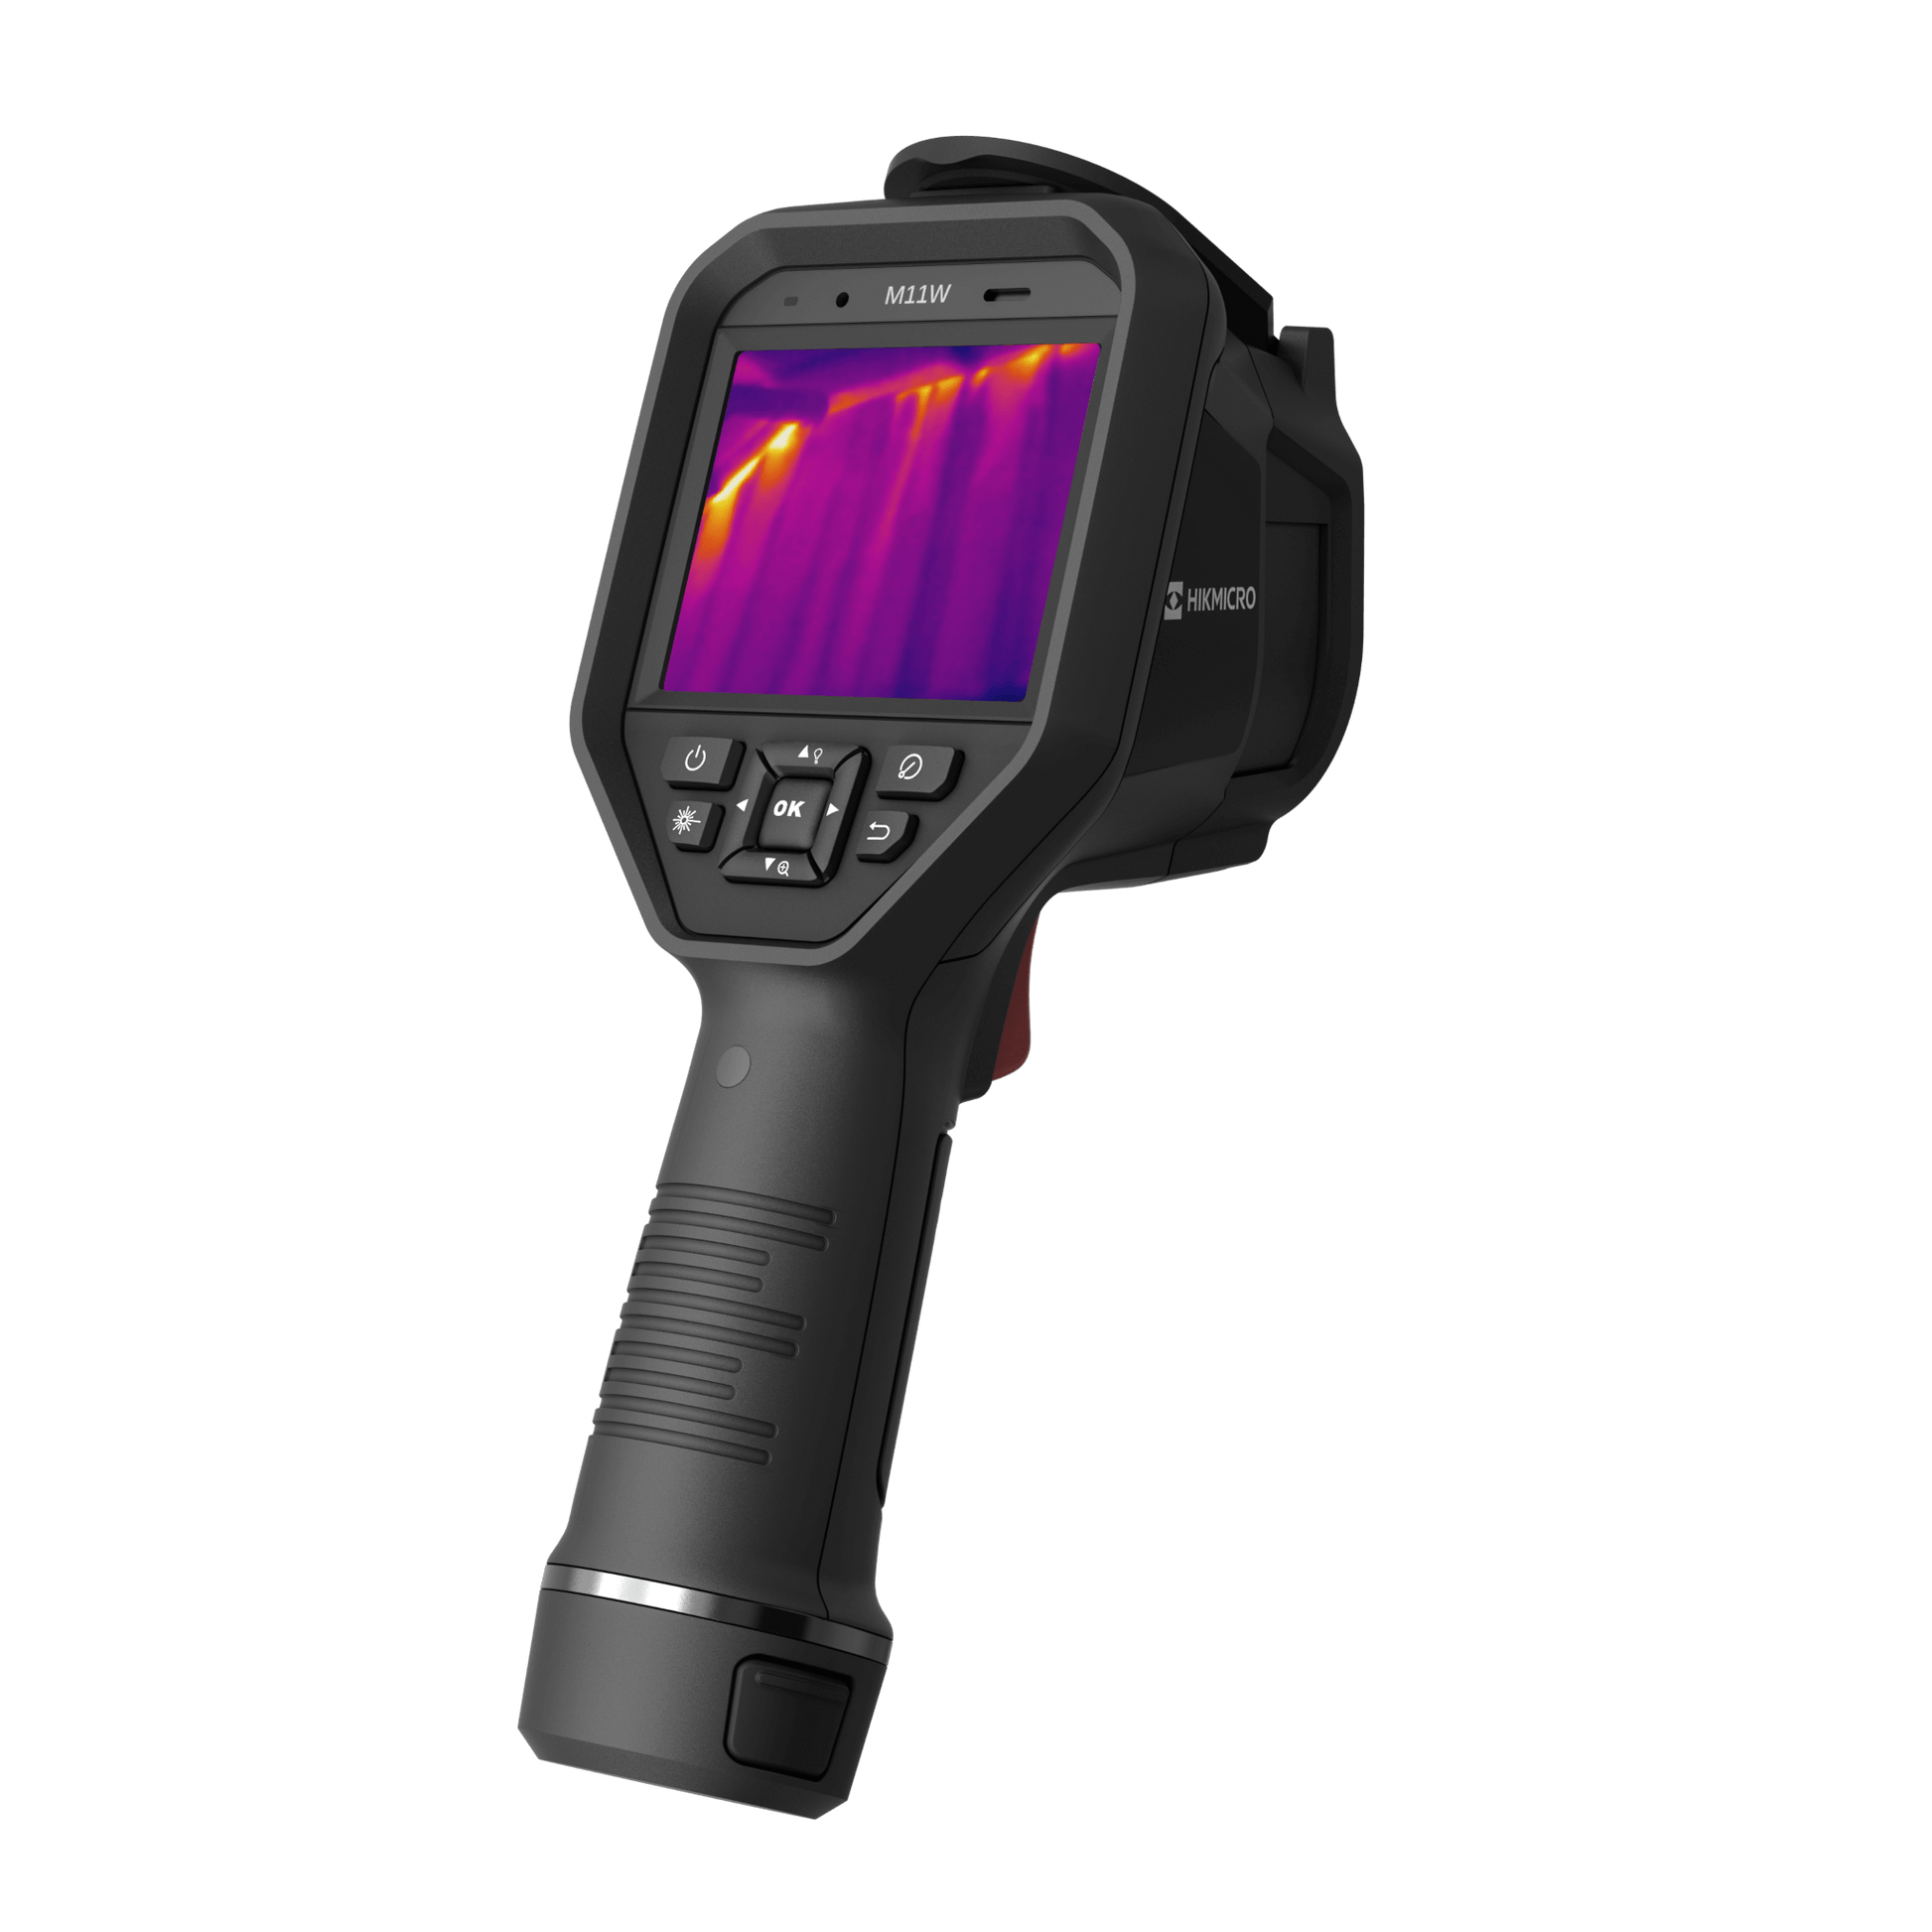 HikMicro M11W Handheld Thermography Camera alternative rear right view on a transparent background